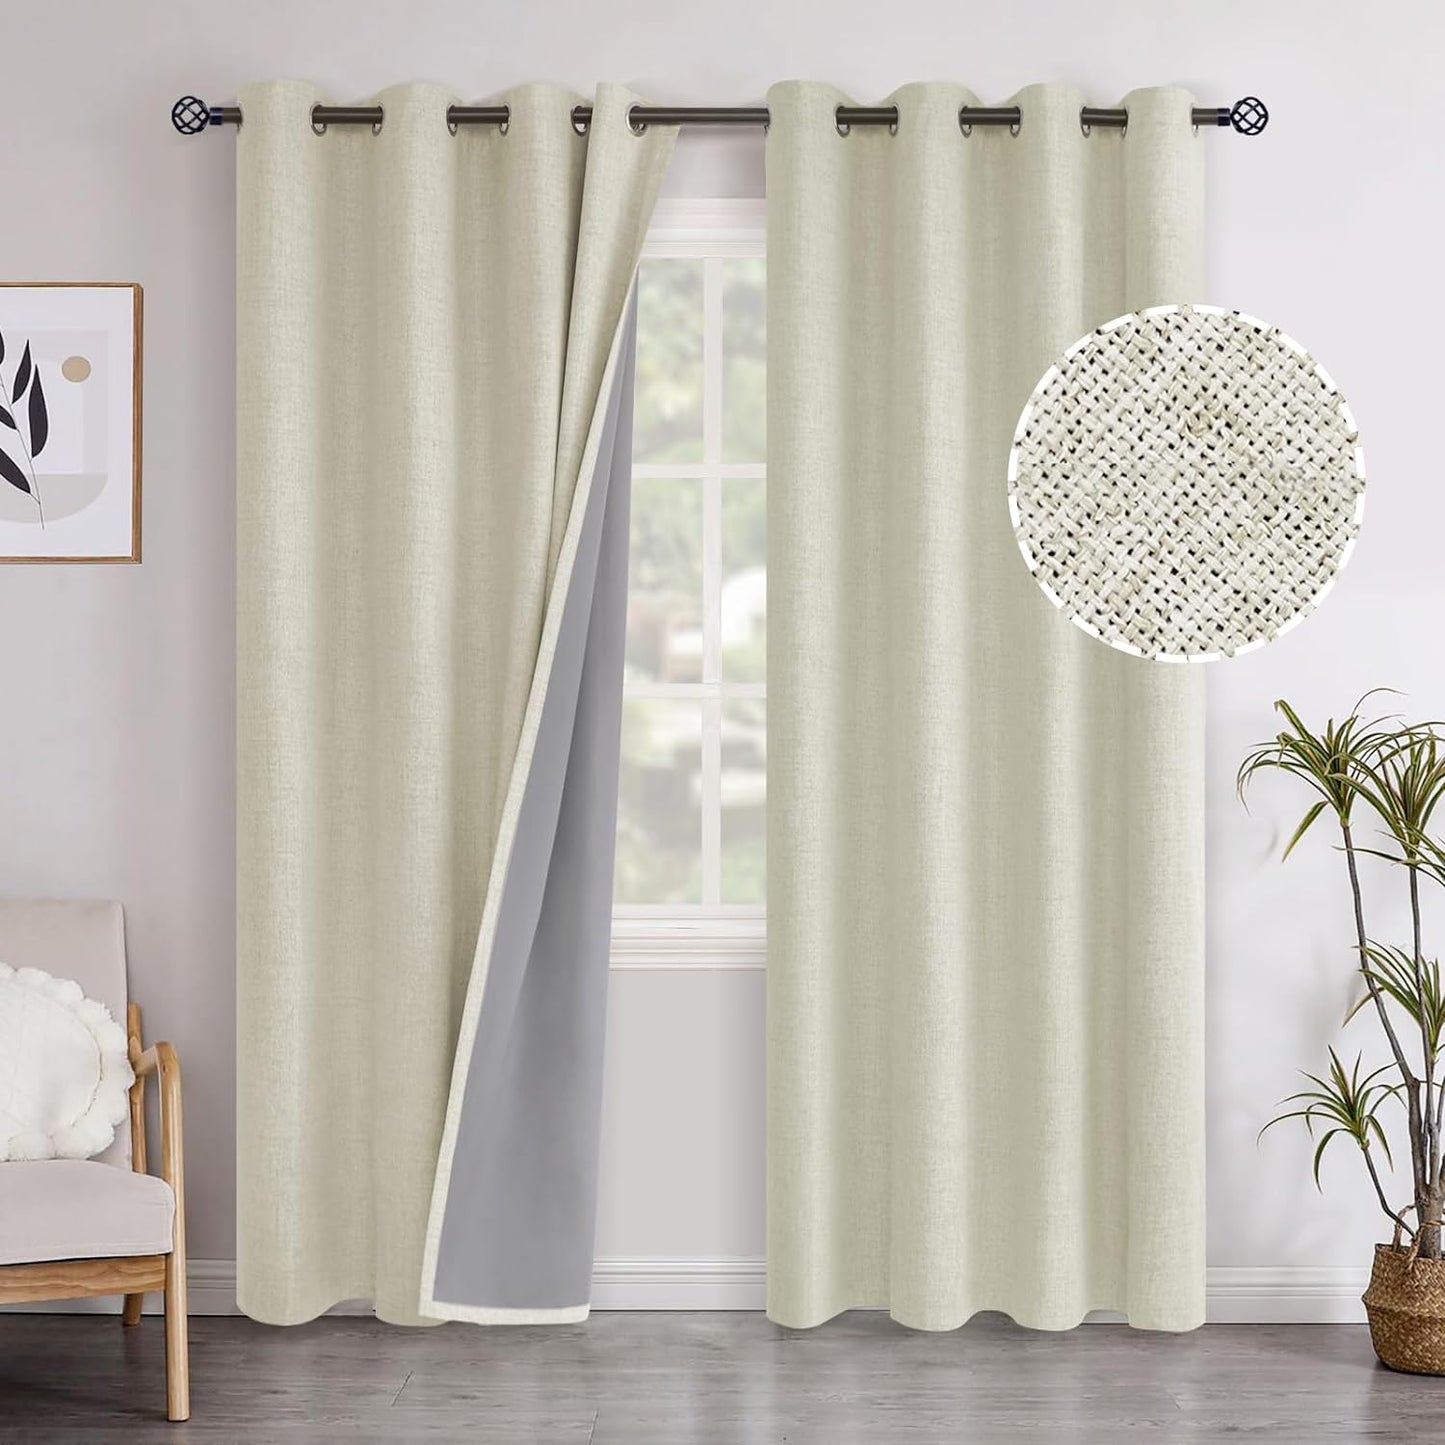 Youngstex Linen Blackout Curtains 63 Inch Length, Grommet Darkening Bedroom Curtains Burlap Linen Window Drapes Thermal Insulated for Basement Summer Heat, 2 Panels, 52 X 63 Inch, Beige  YoungsTex Cream 52W X 95L 